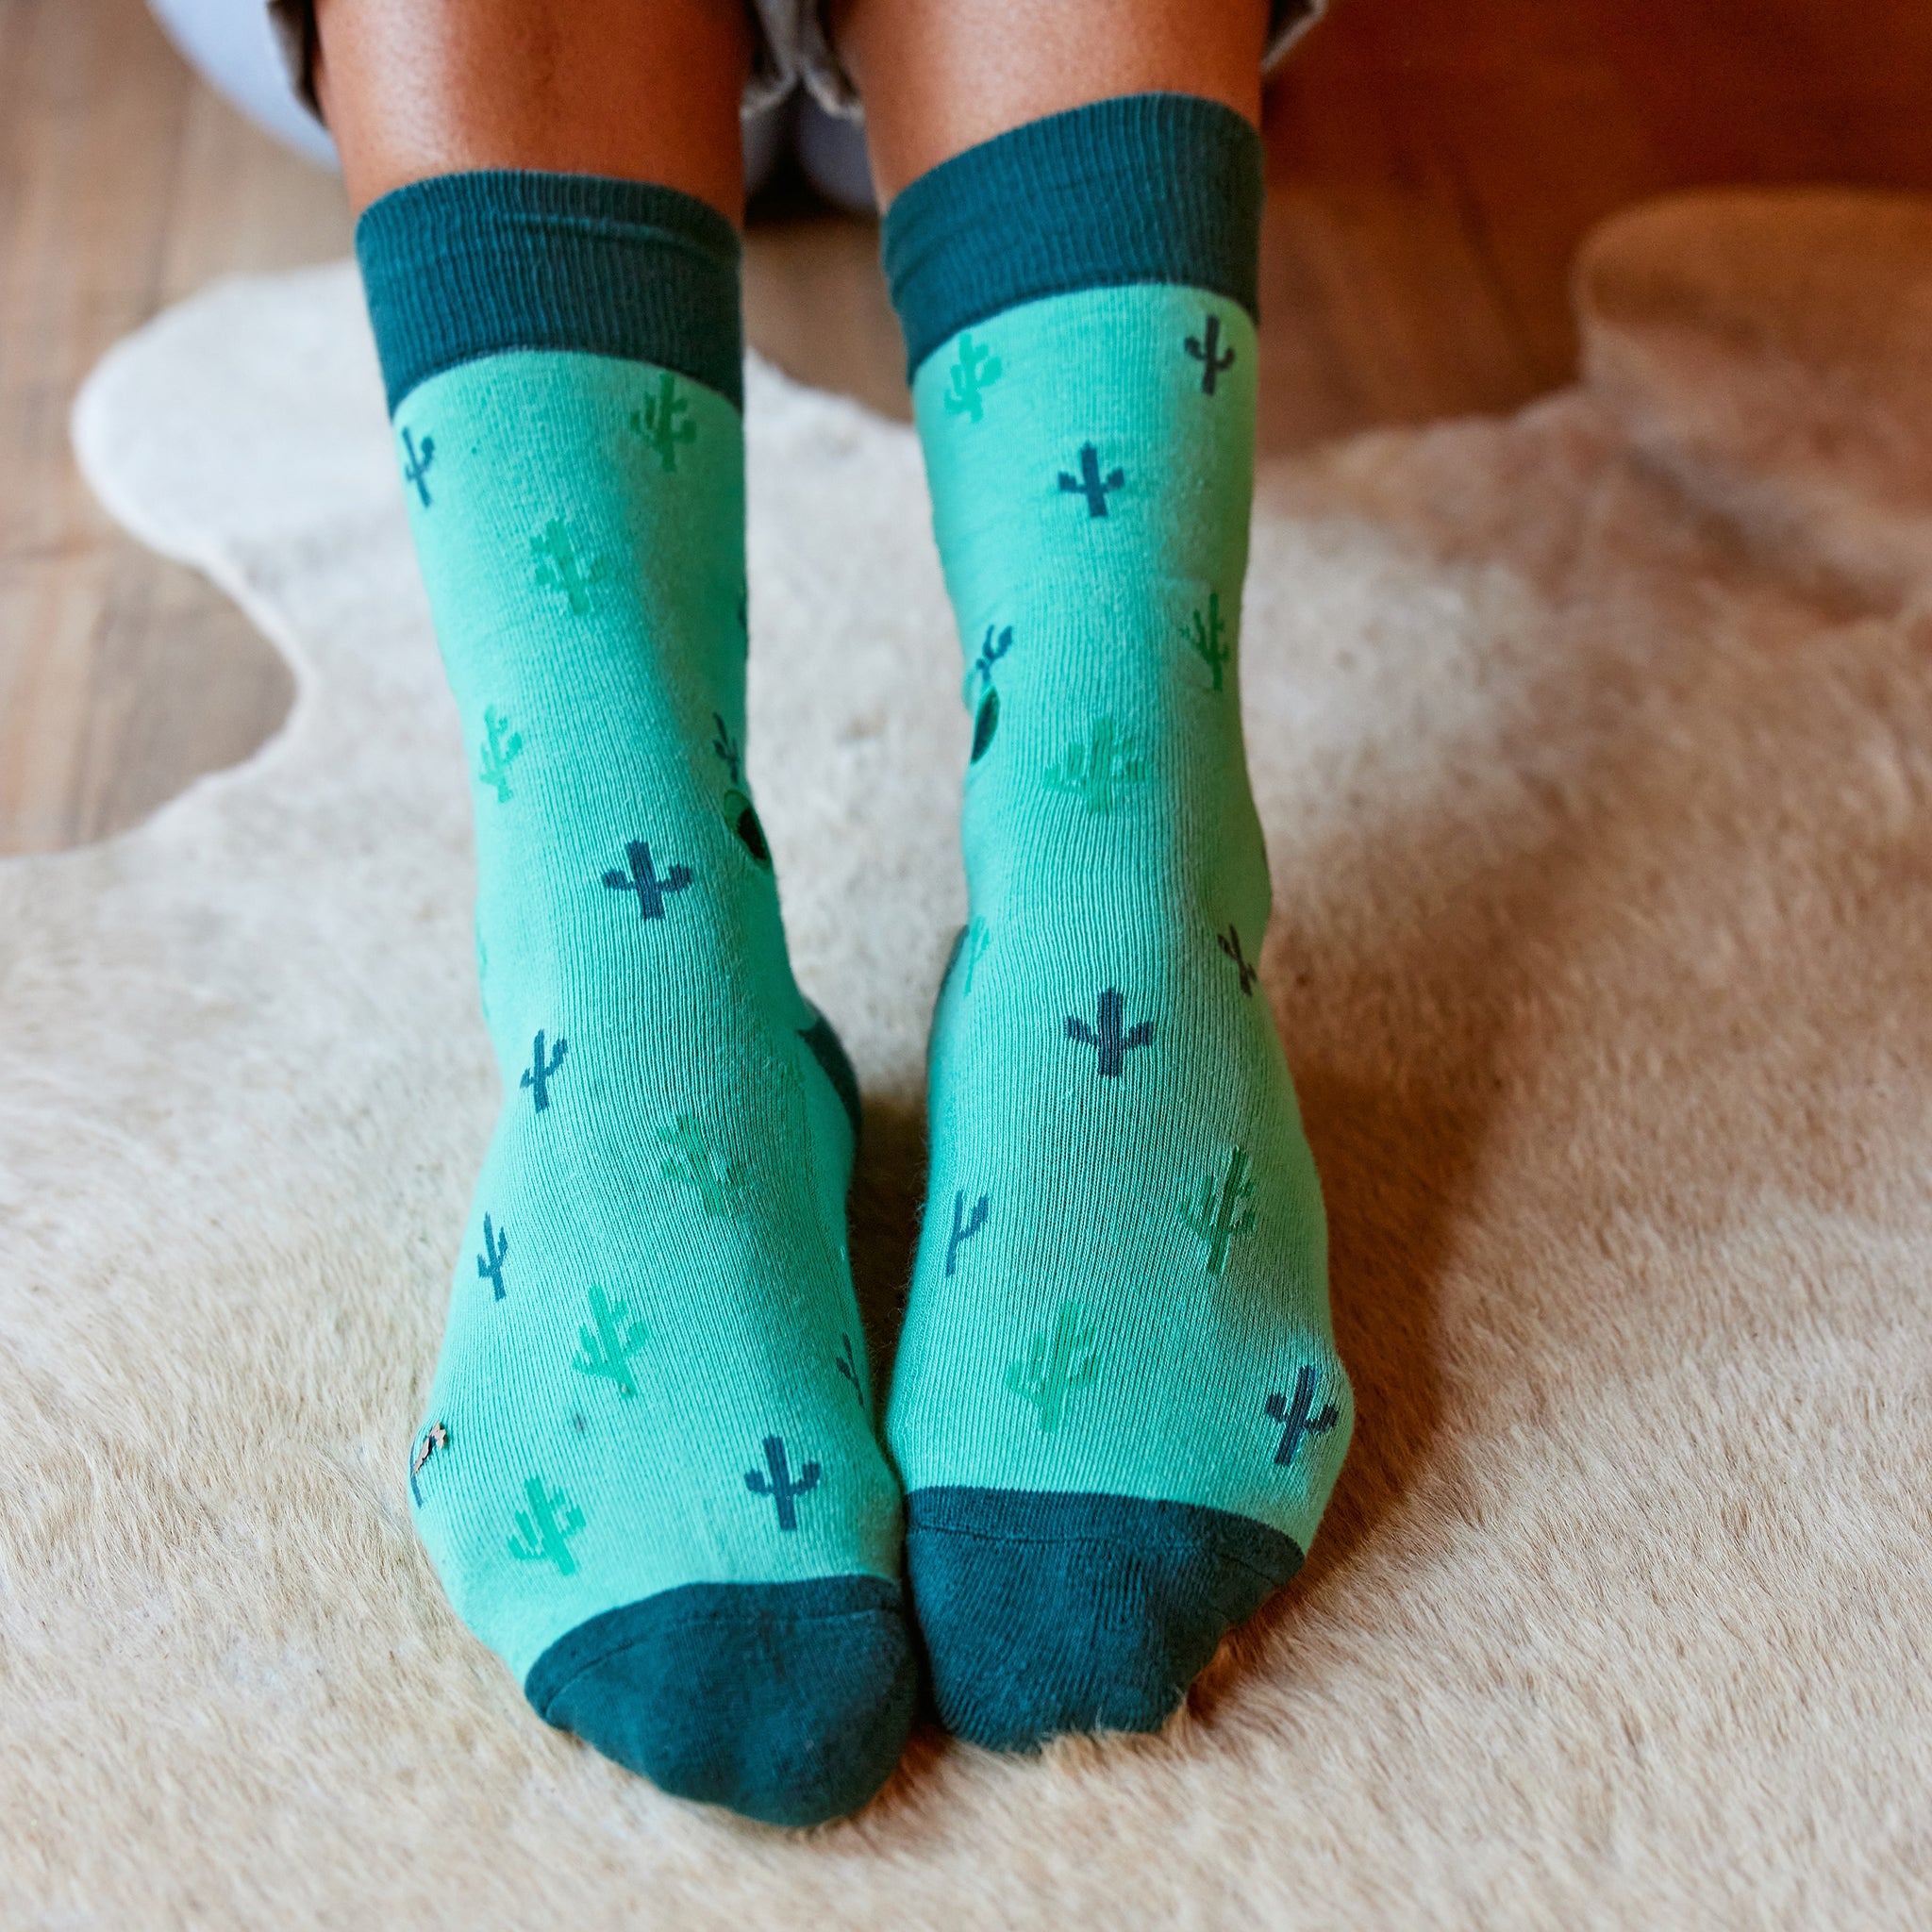 Socks That Protect Tropical Rainforests